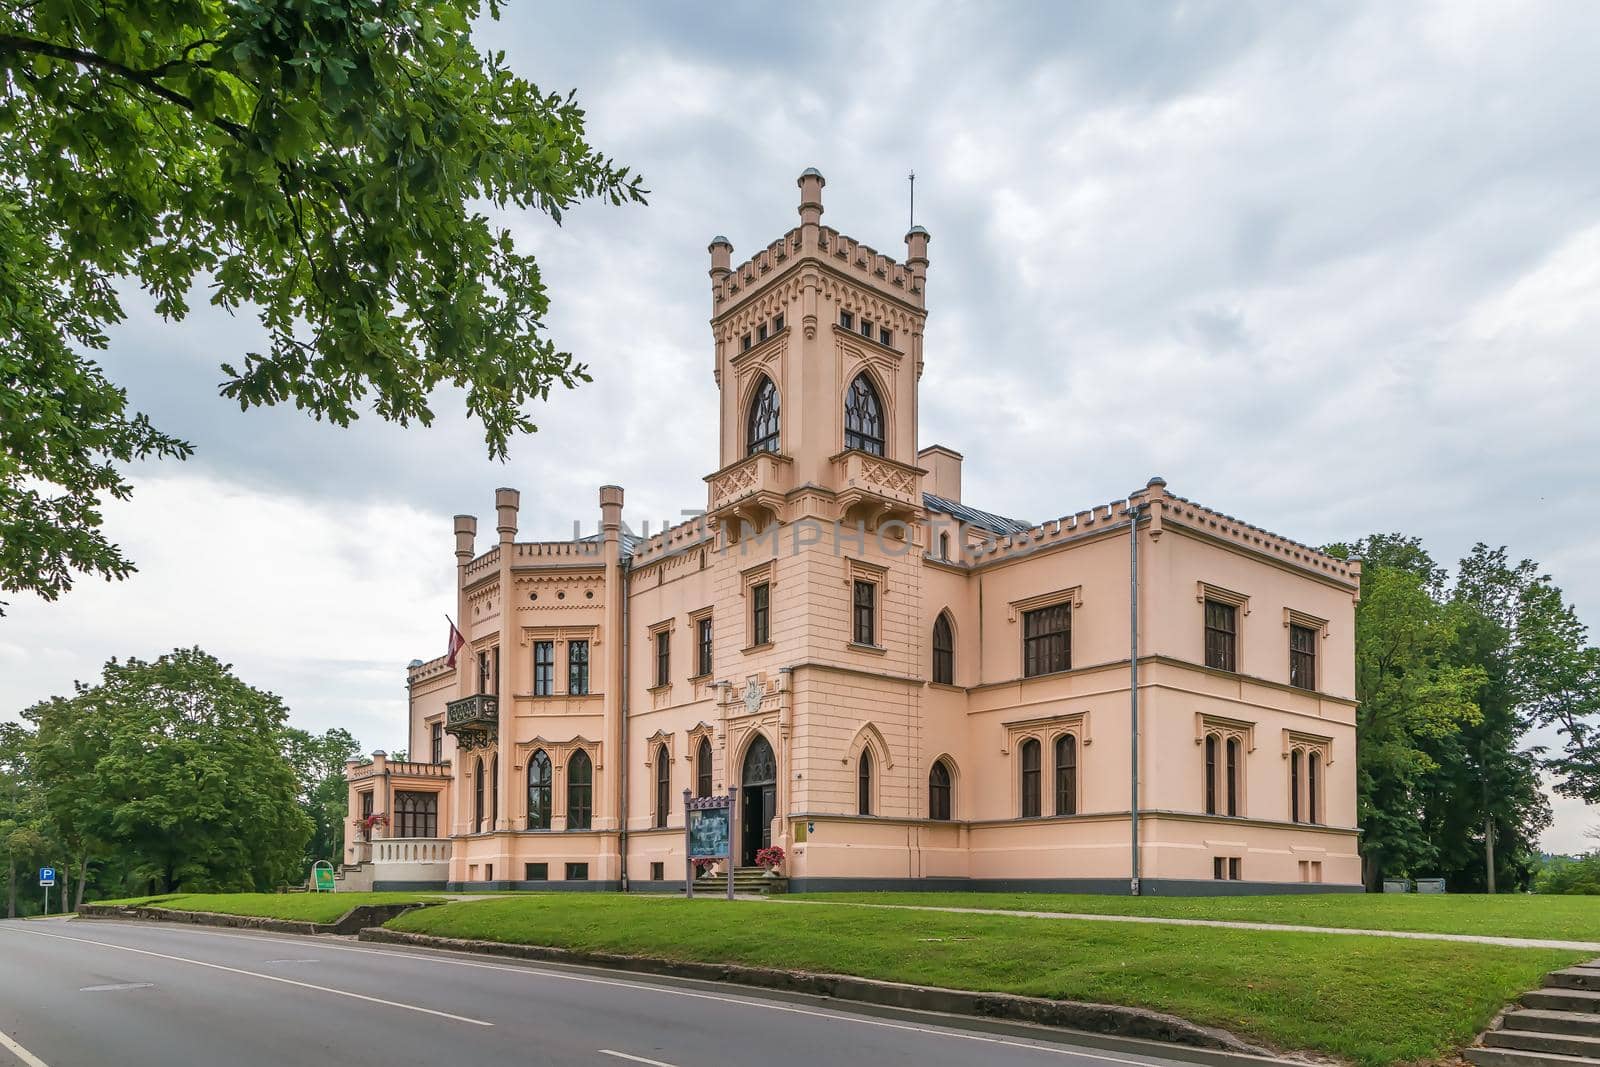 Aluksne New Castle was built from 1859 to 1863 in the style of English neo-gothi, Latvia